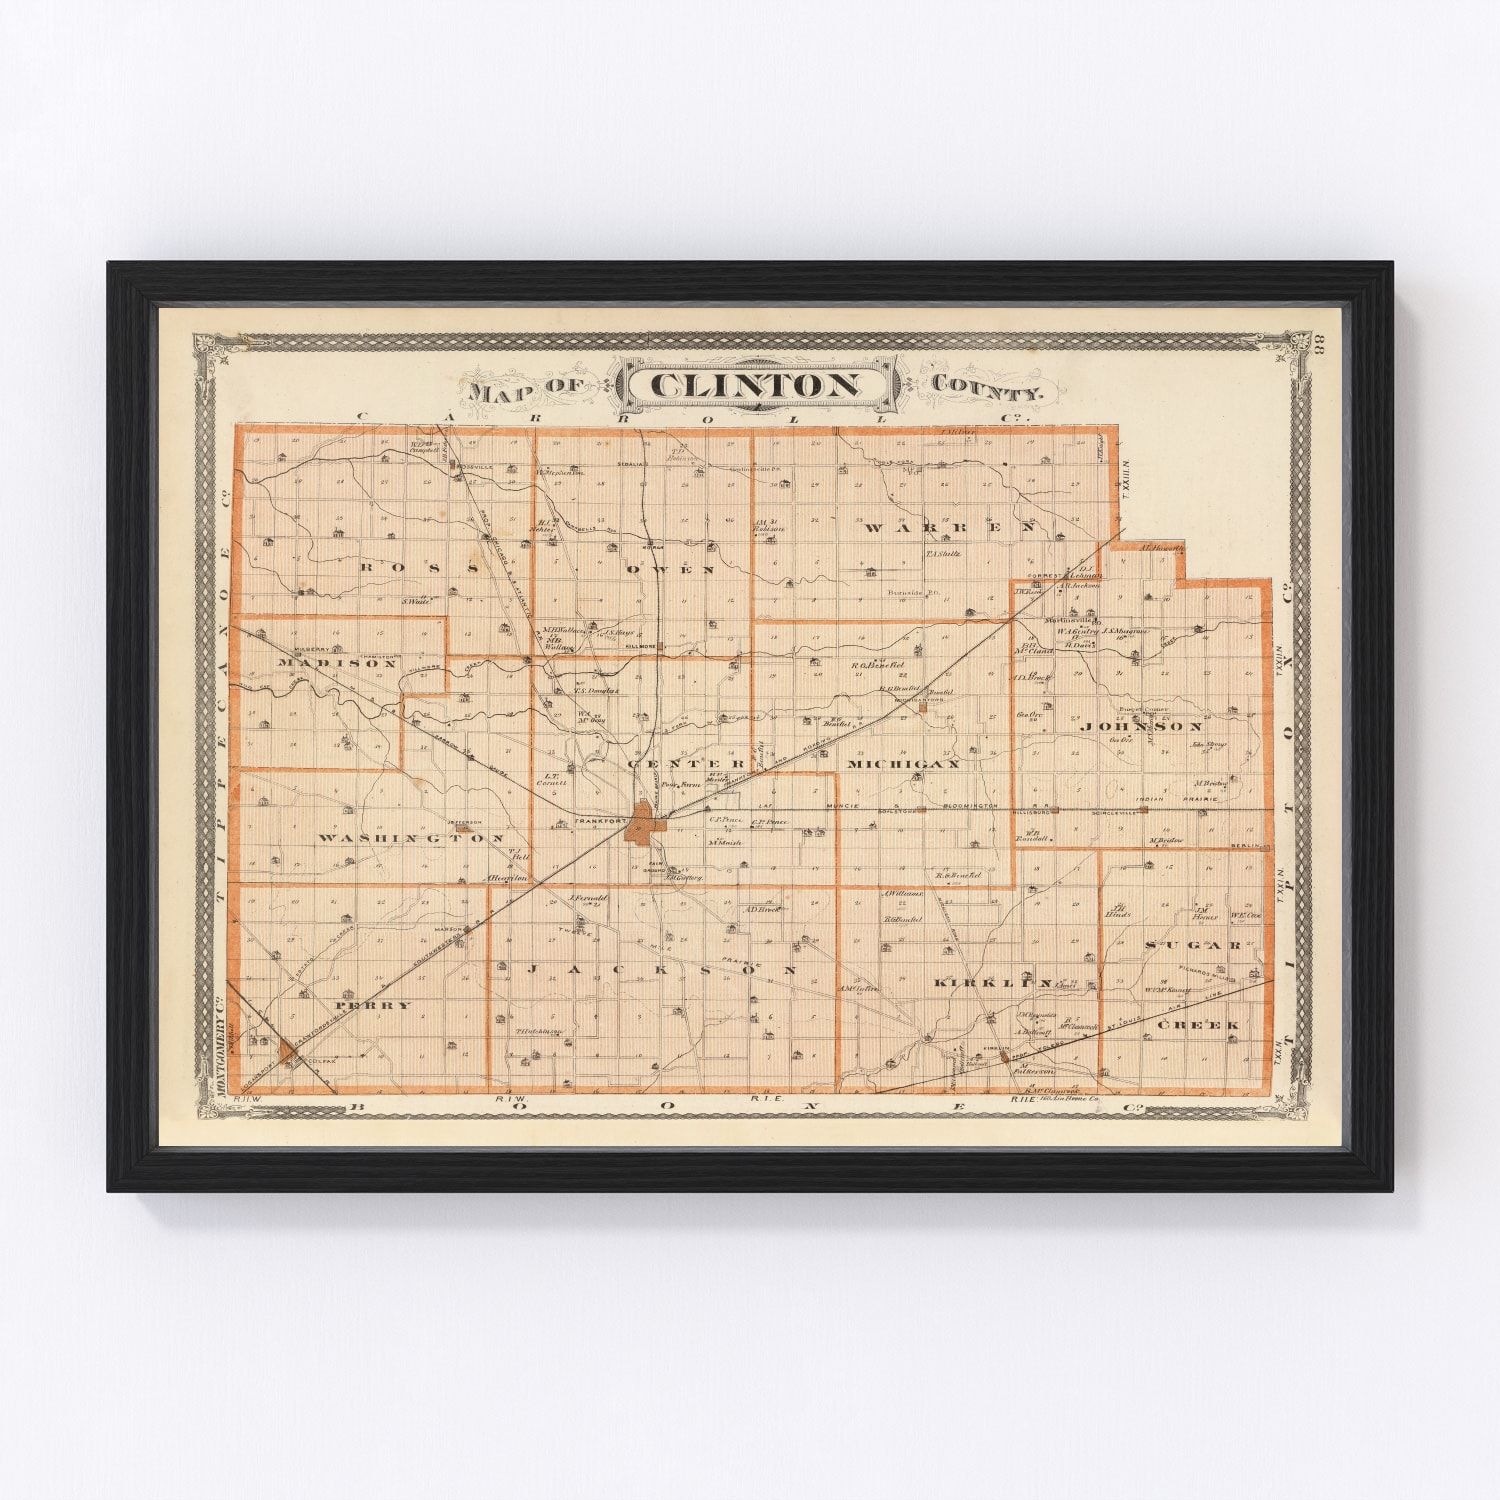 Vintage Map Of Clinton County Indiana 1876 By Teds Vintage Art 2890